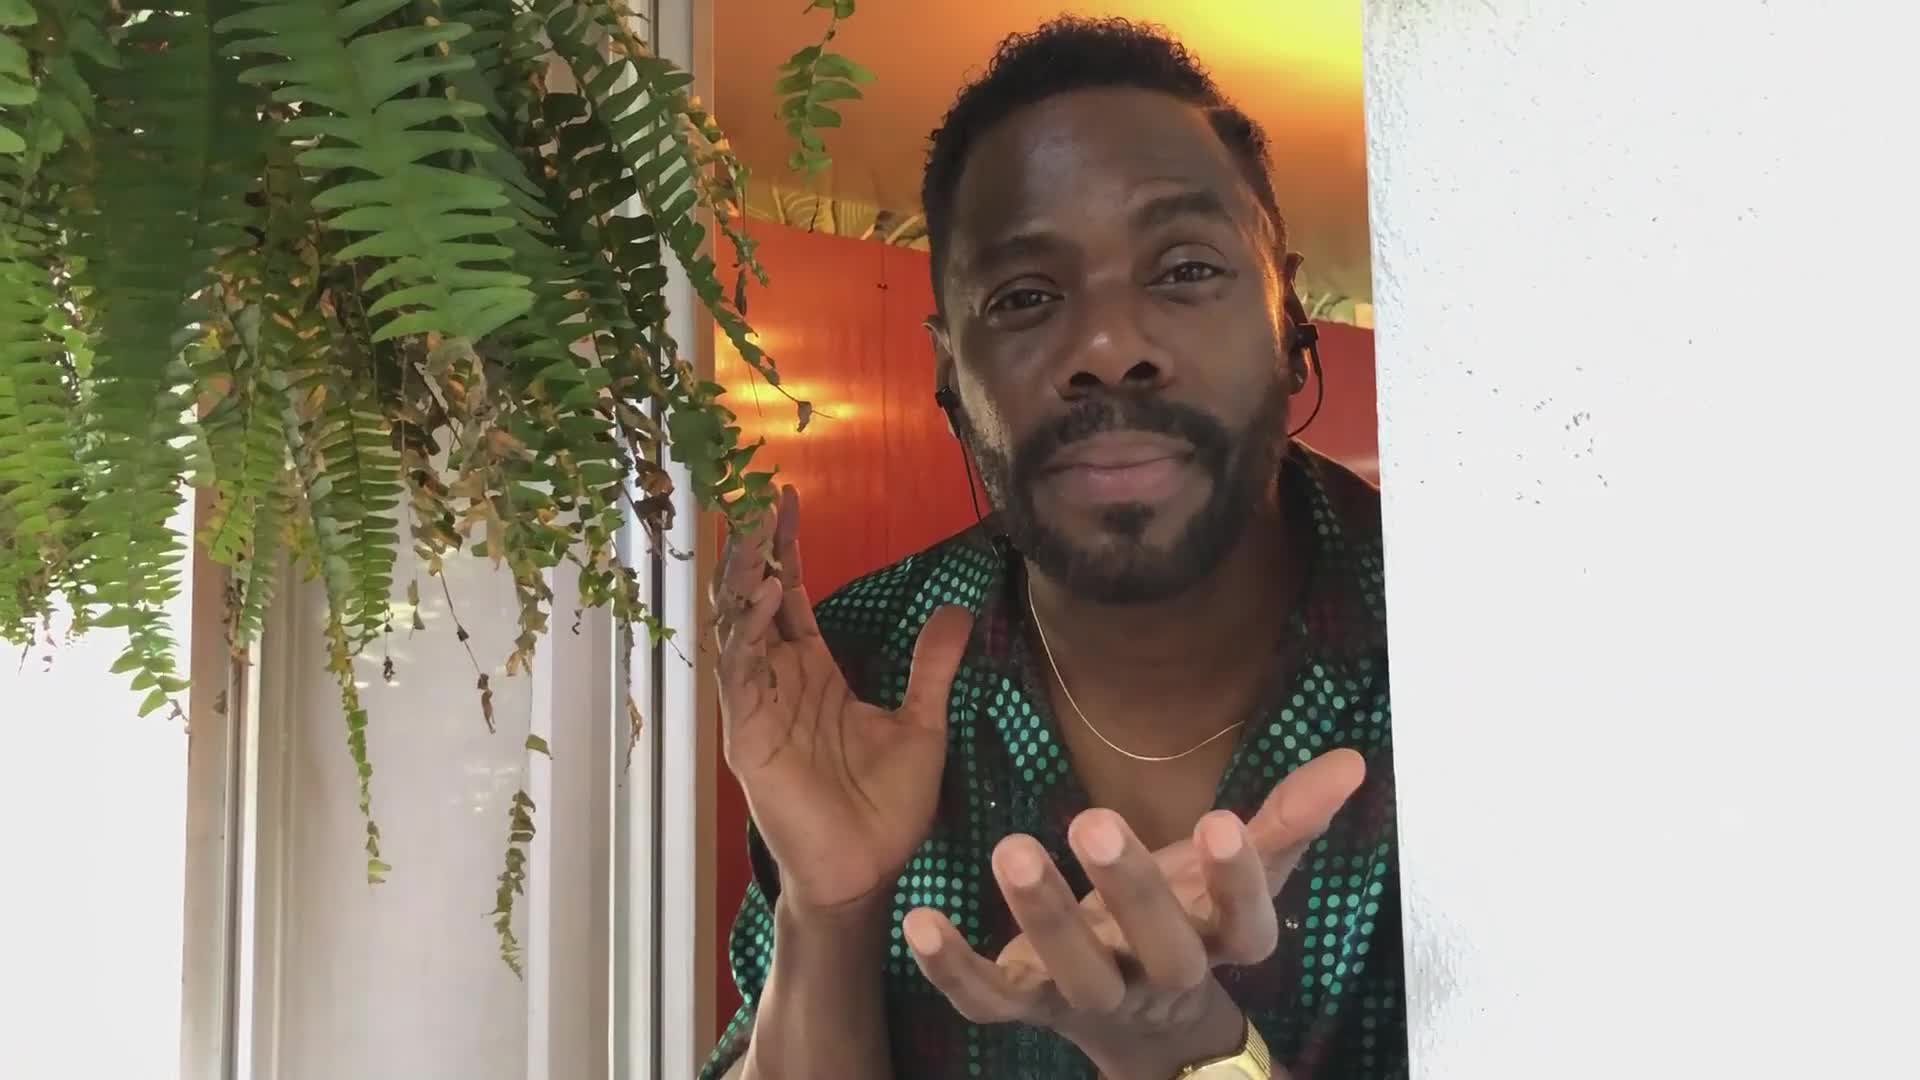 Bottomless Brunch at Colman’s Trailer, Join Fear the Walking Dead Star Colman Domingo as he virtually welcomes guests to enjoy a cocktail and a decadent brunch. New episodes Sundays at 2 p.m.